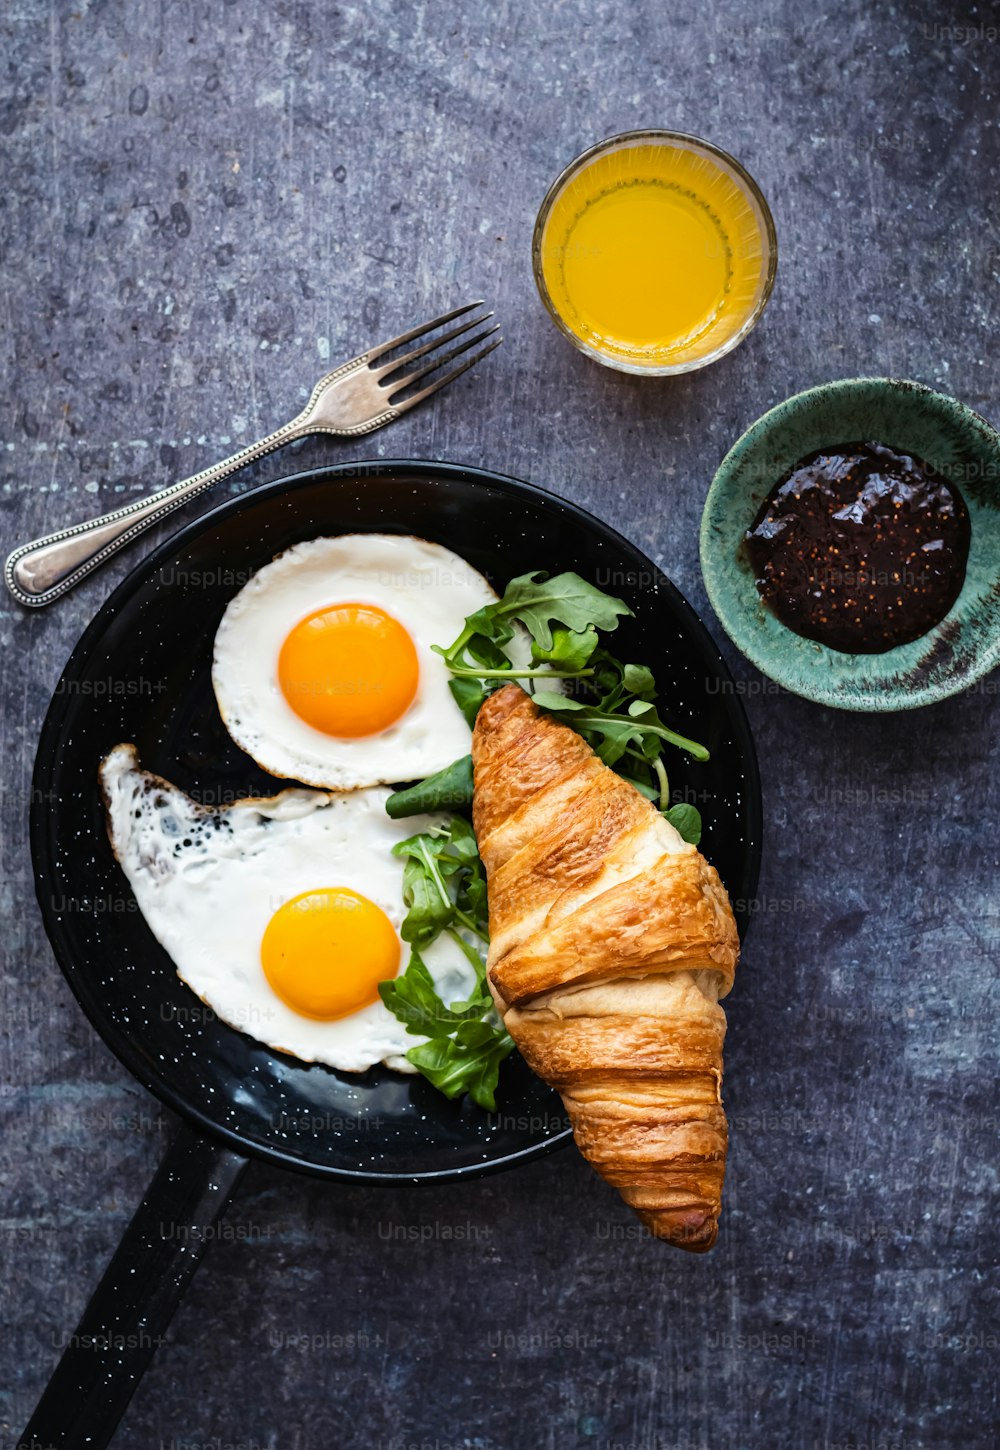 a breakfast of eggs, croissants, and greens on a black plate